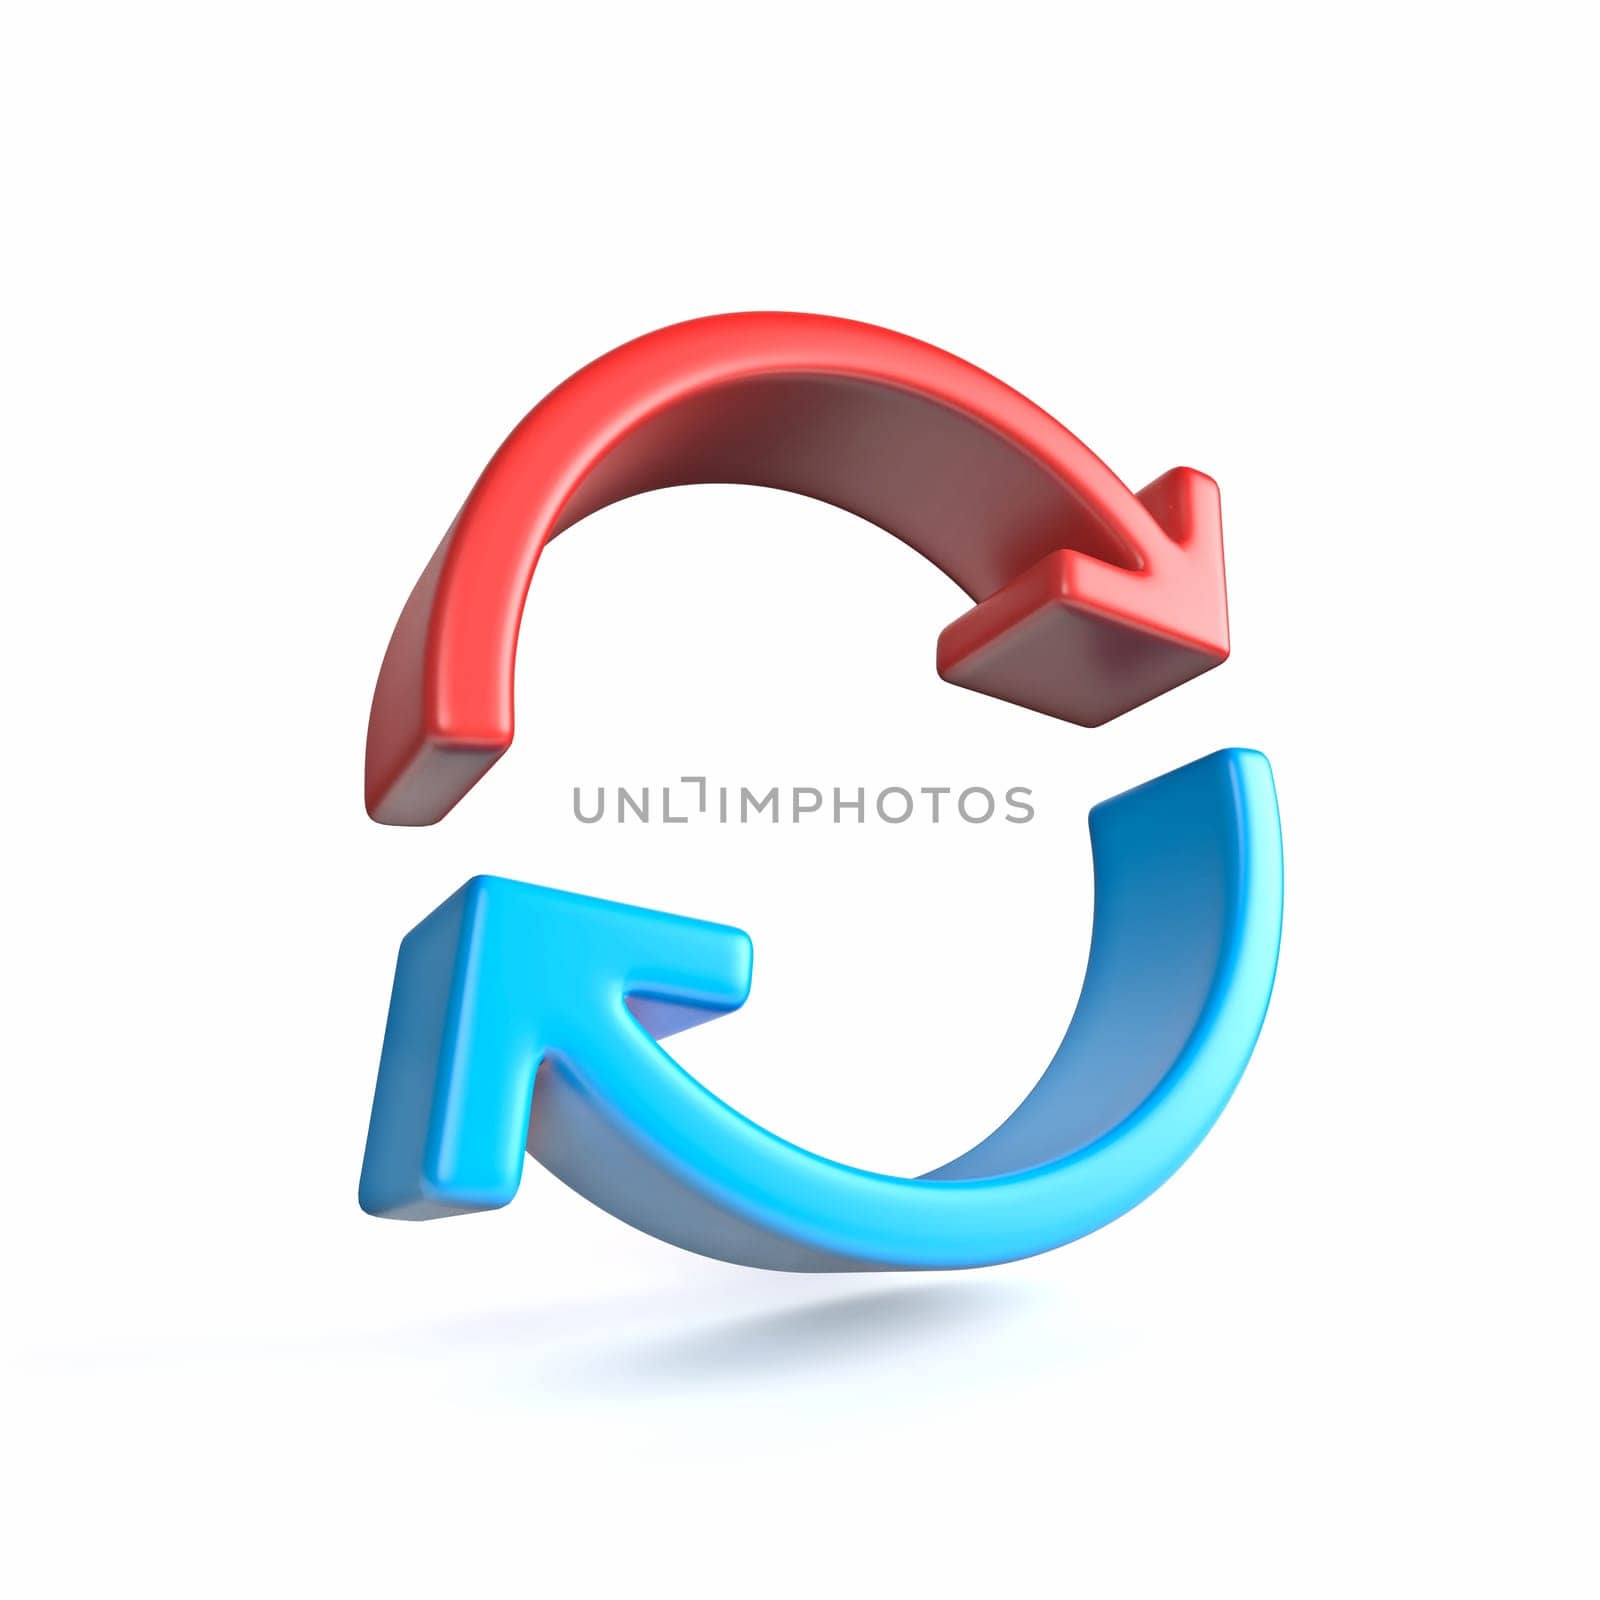 Two arrows circle Side view 3D rendering illustration isolated on white background